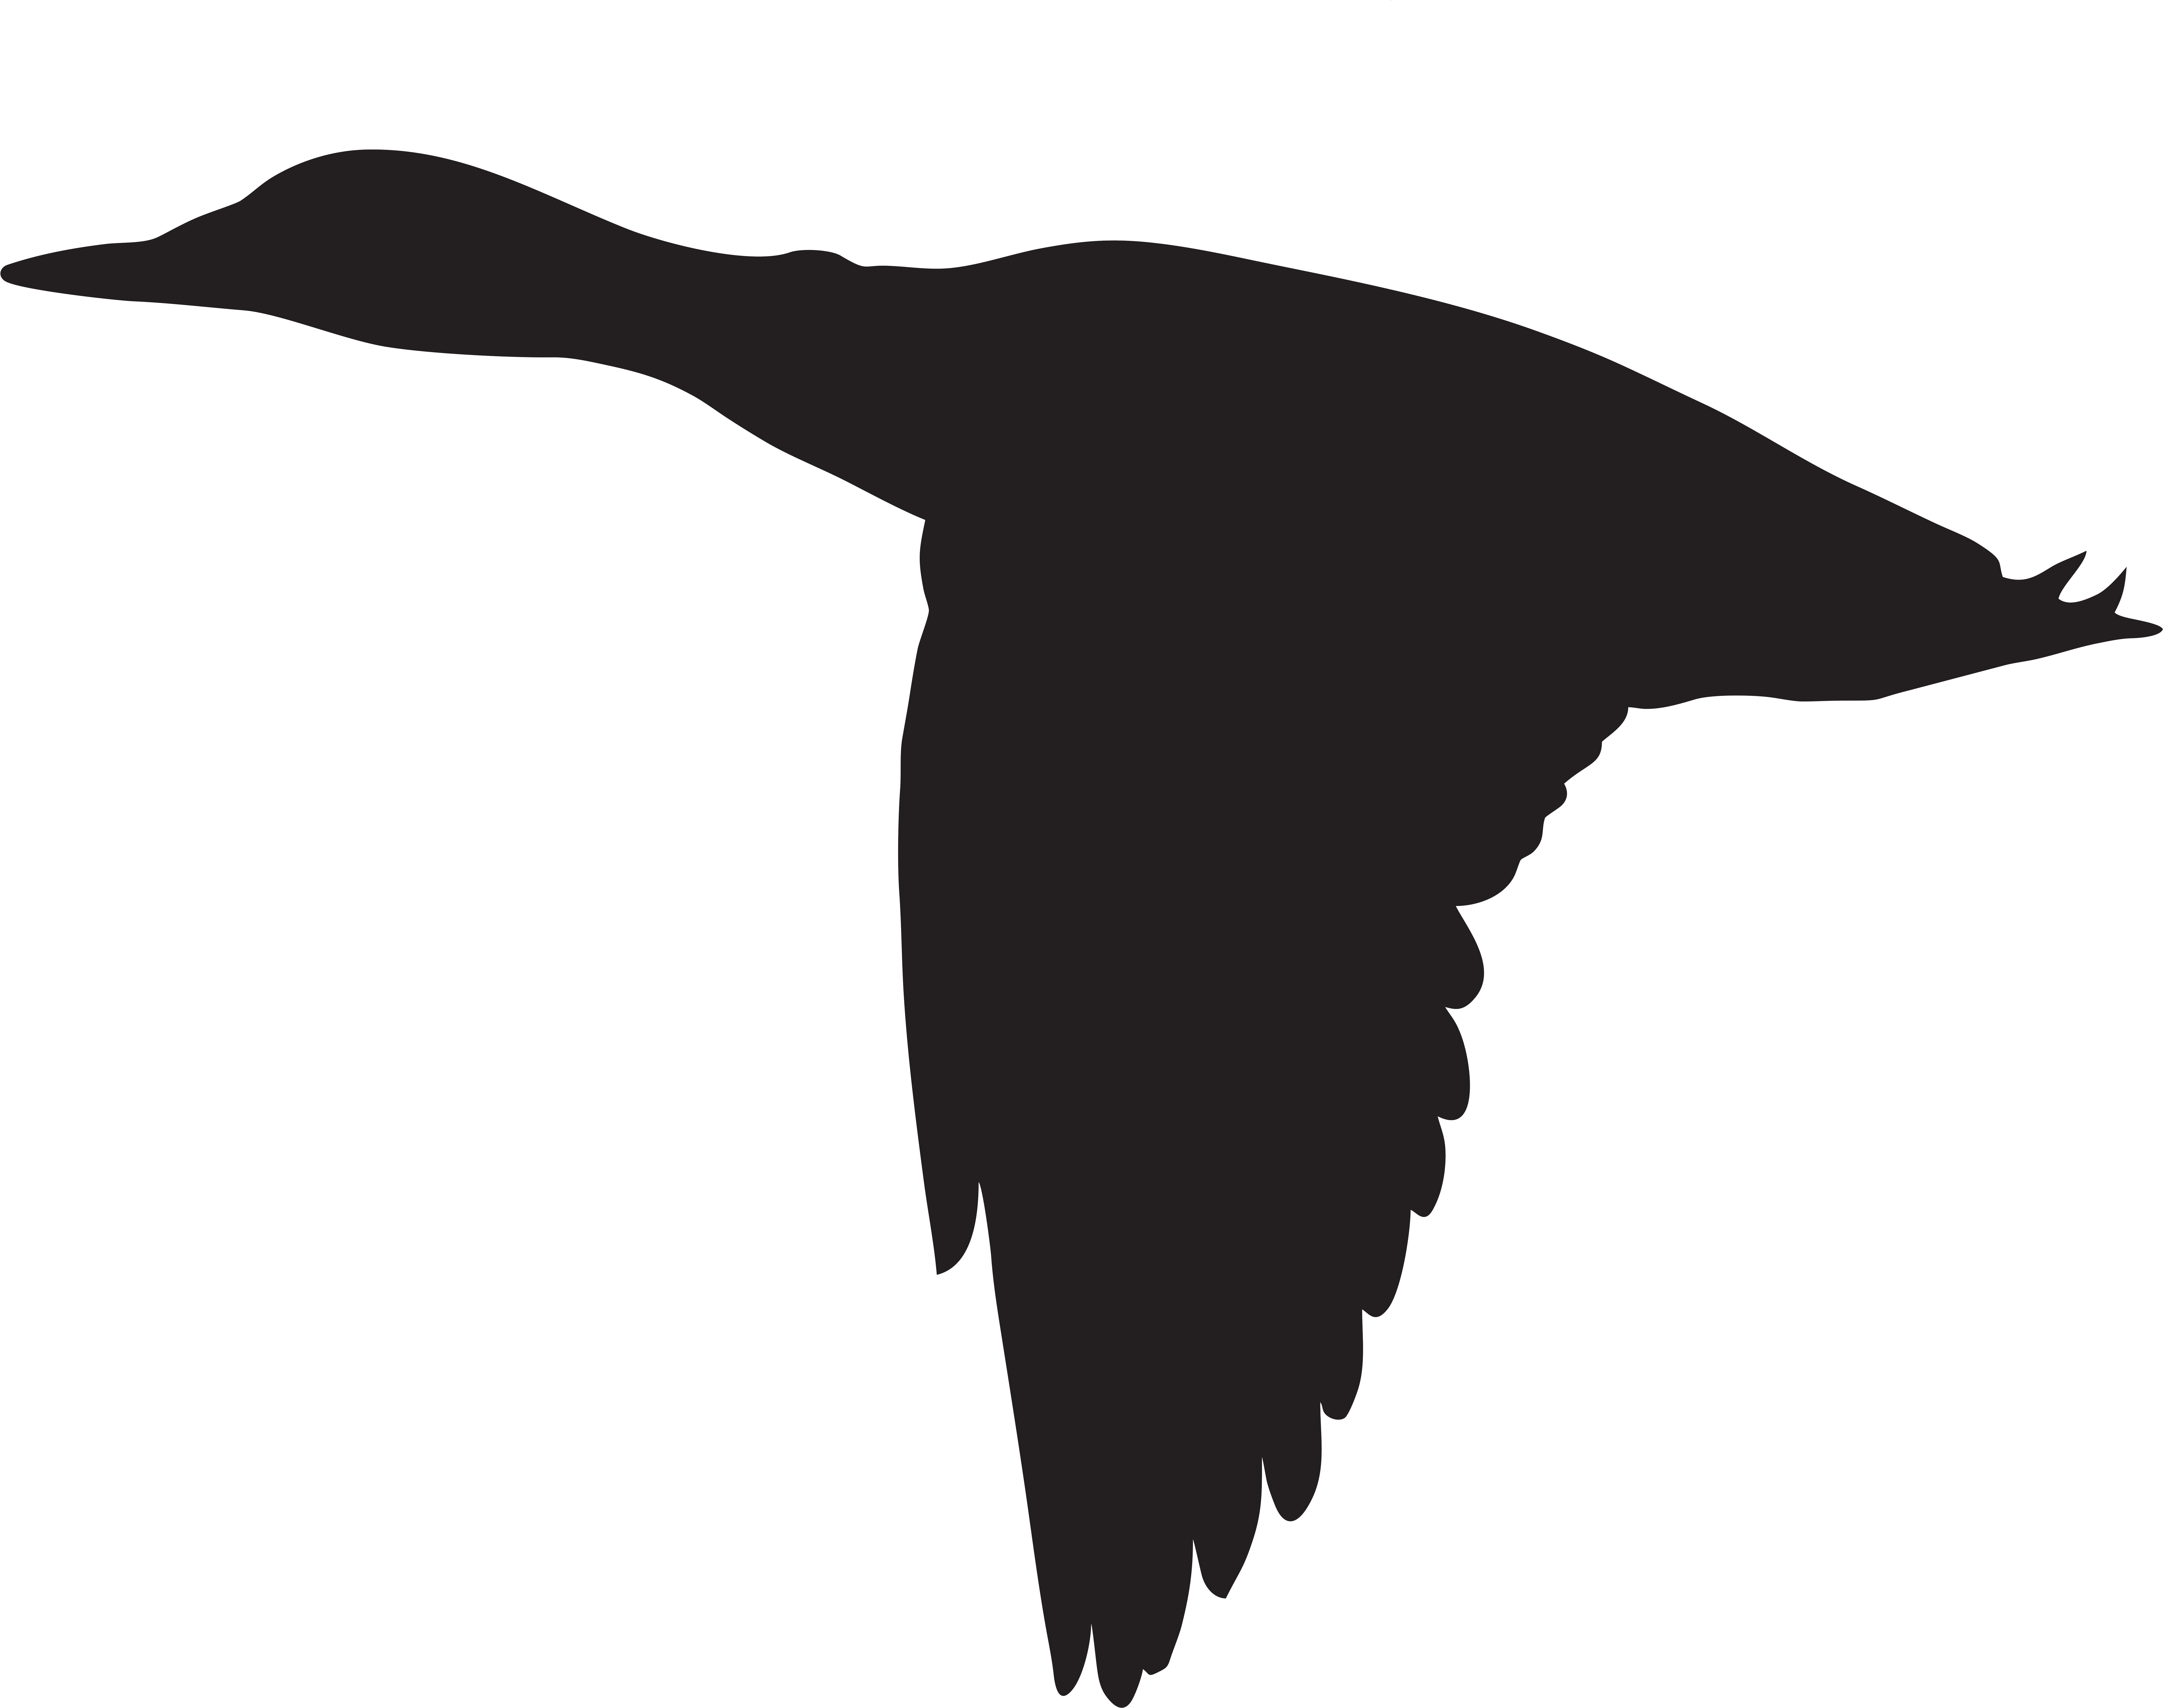 Duck Flying Silhouette Png Clip Art Image 